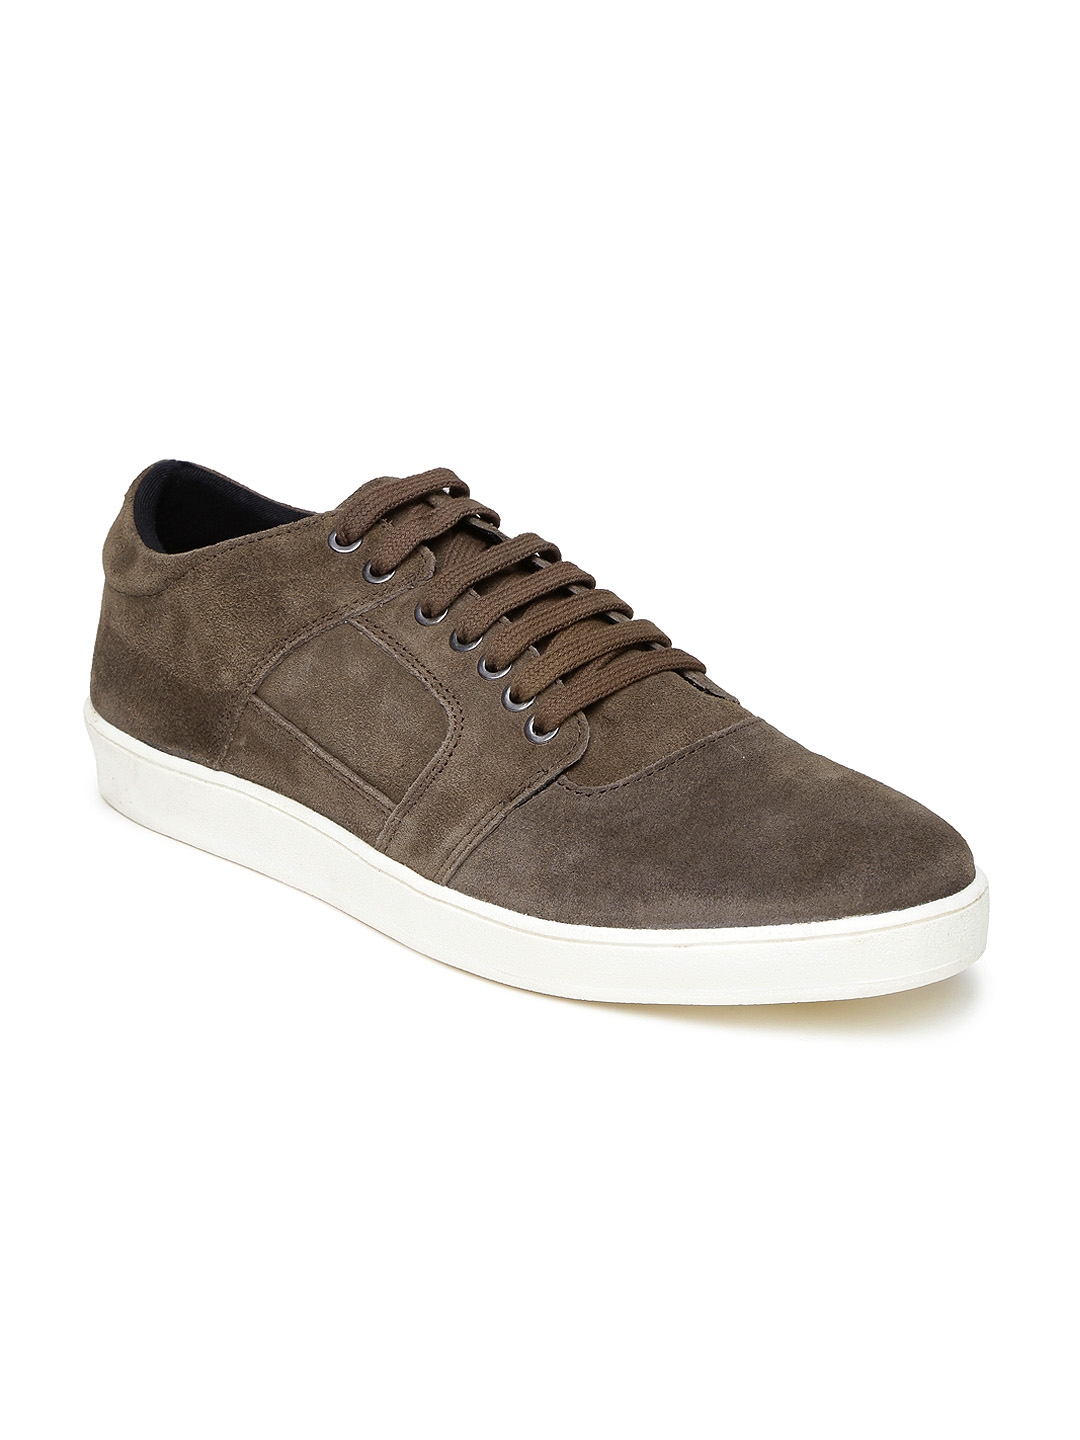 Buy Roadster Men Brown Casual Shoes - Casual Shoes for Men 1079810 | Myntra